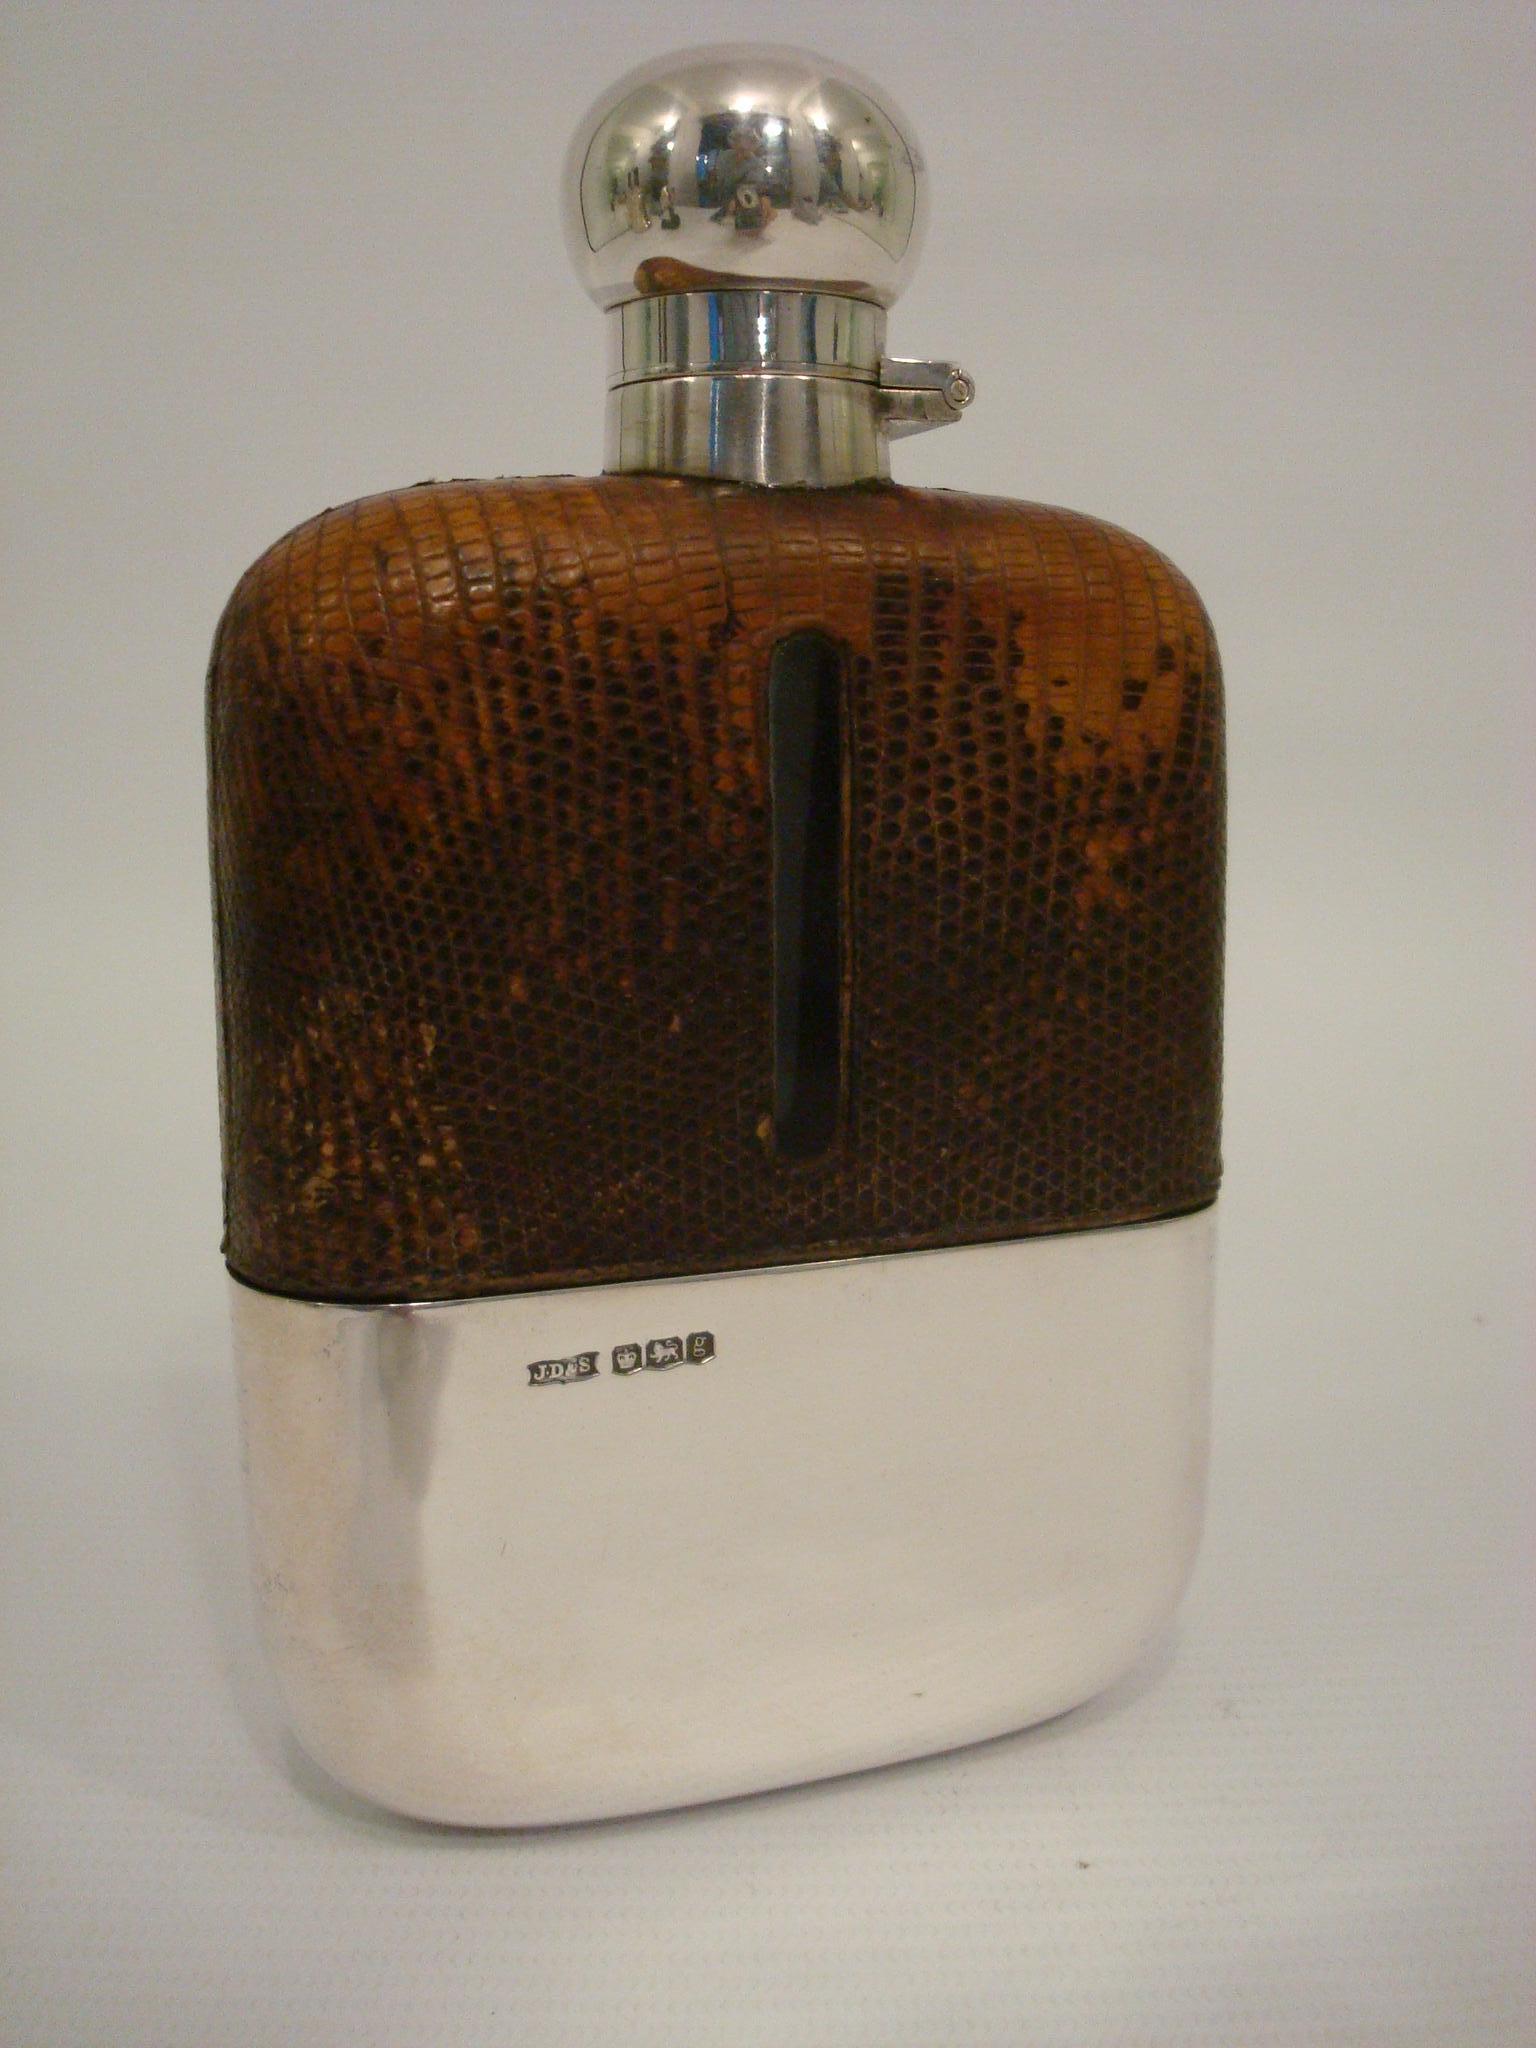 A magnificent, fine and impressive, antique George V glass, English sterling silver and Lizard / Snake skin Leather mounted hip flask.
This magnificent antique George V sterling silver hip flask has a rectangular form with rounded corners.
The